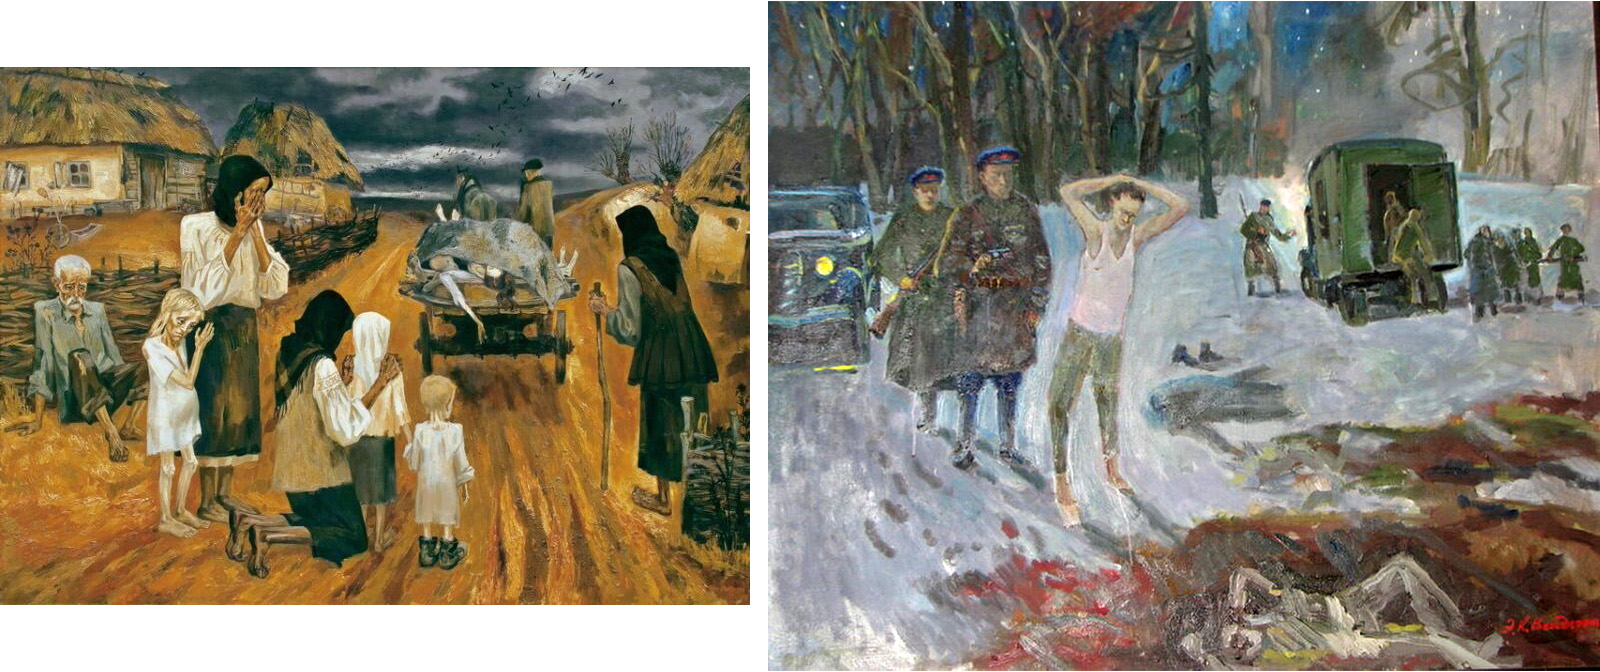 Anti-Soviet paintings by famous artists that make a very strong impression